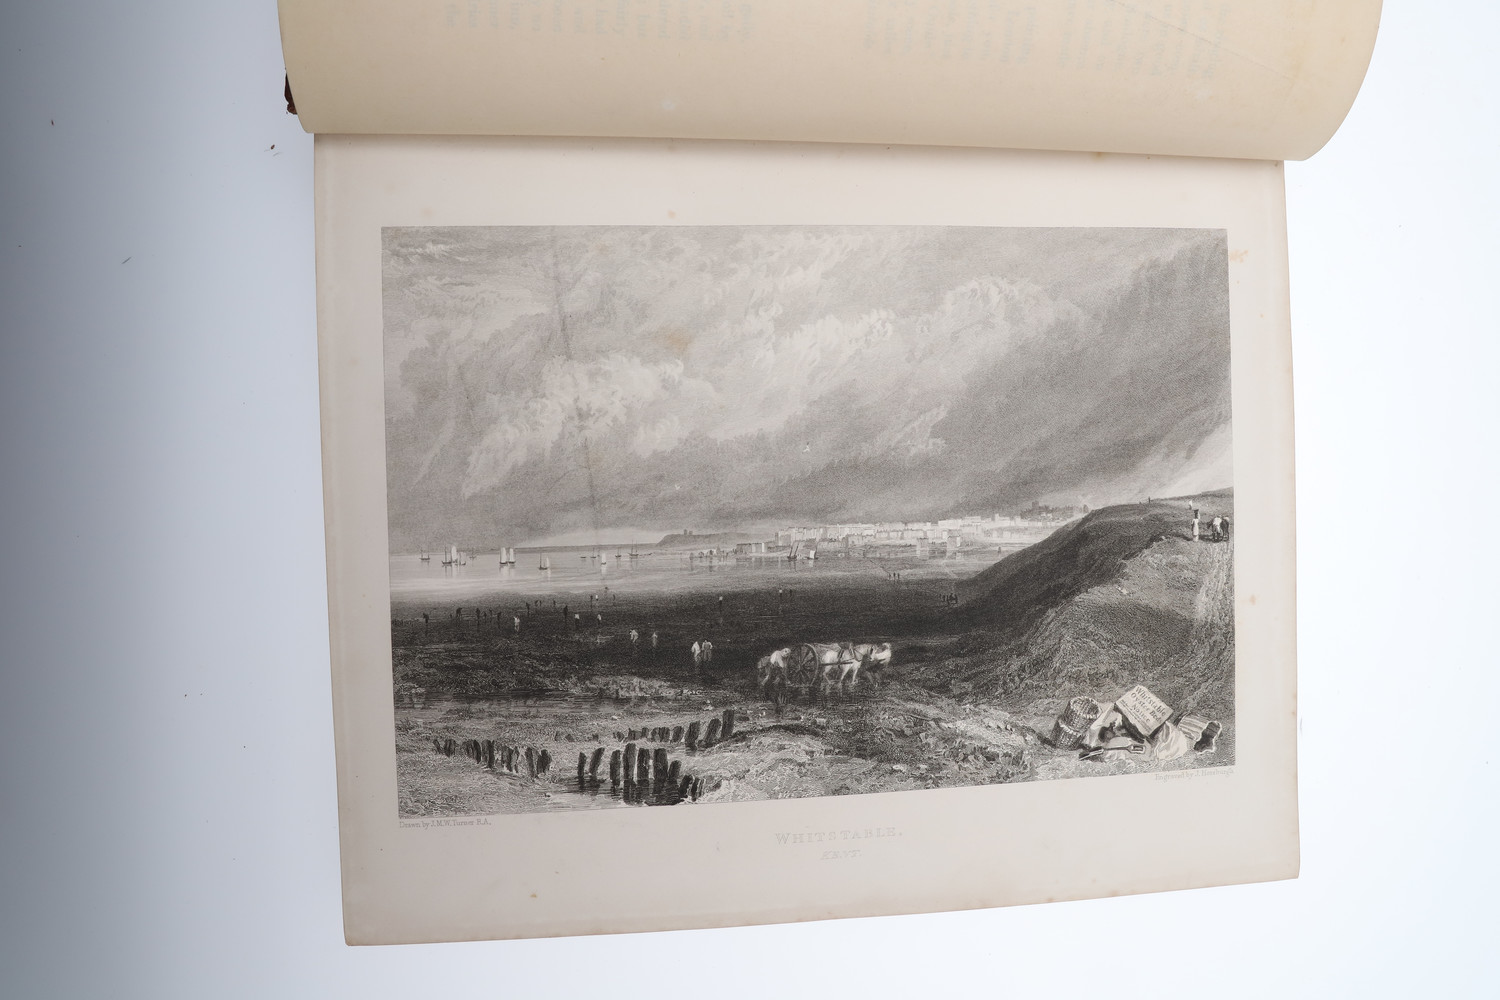 J.M.W. TURNER. An Antiquarian and Picturesque Tour Round the Southern Coast of England, 1849. - Image 4 of 6